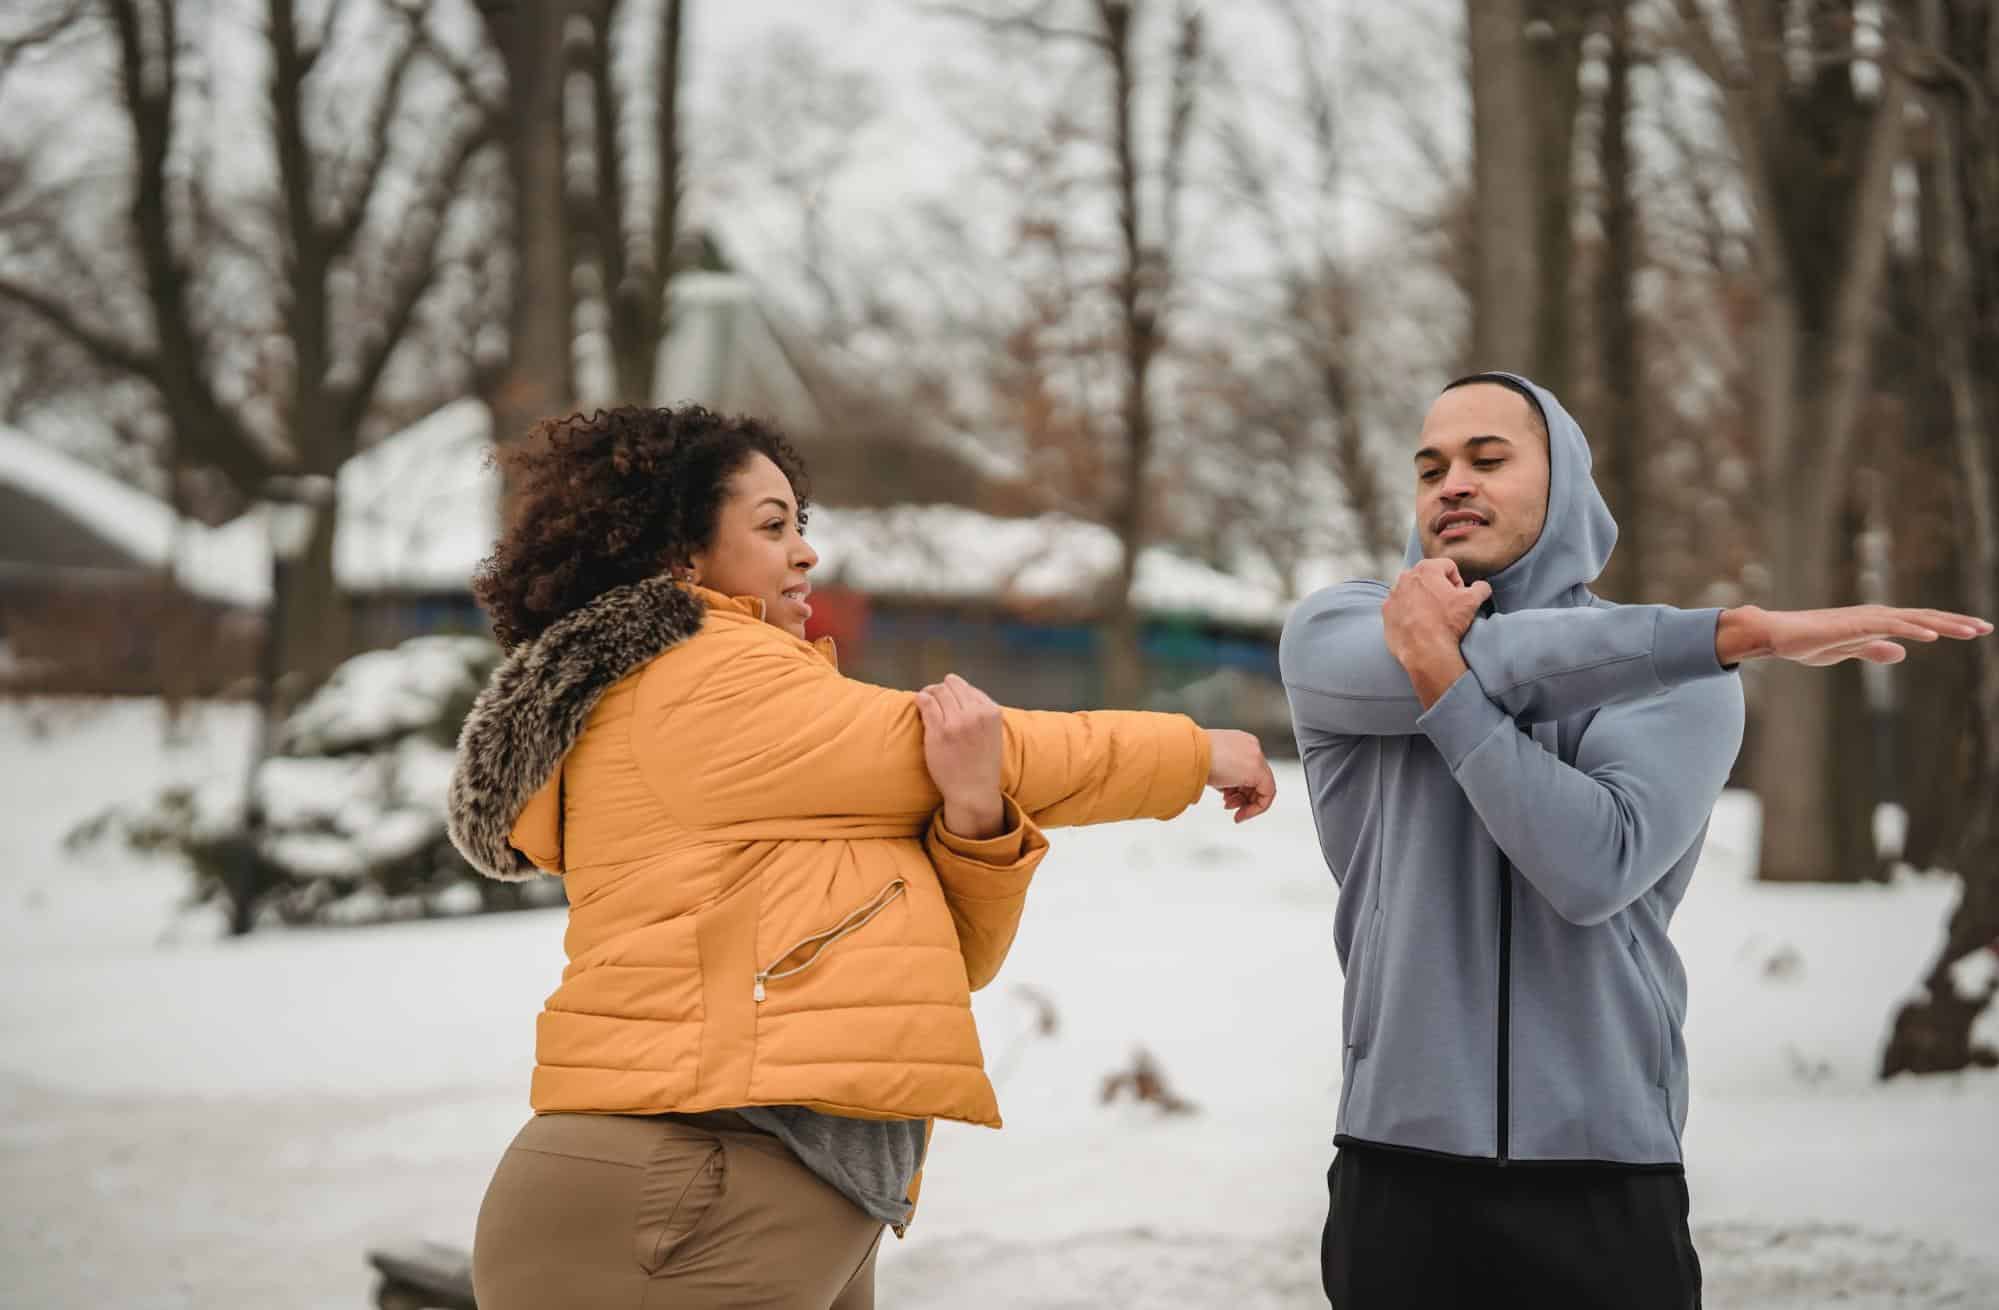 joint pain in cold weather, a woman wearing an orange winter coat and a man wearing a gray zip-up sweatshirt do arm stretches together in a snow covered park.